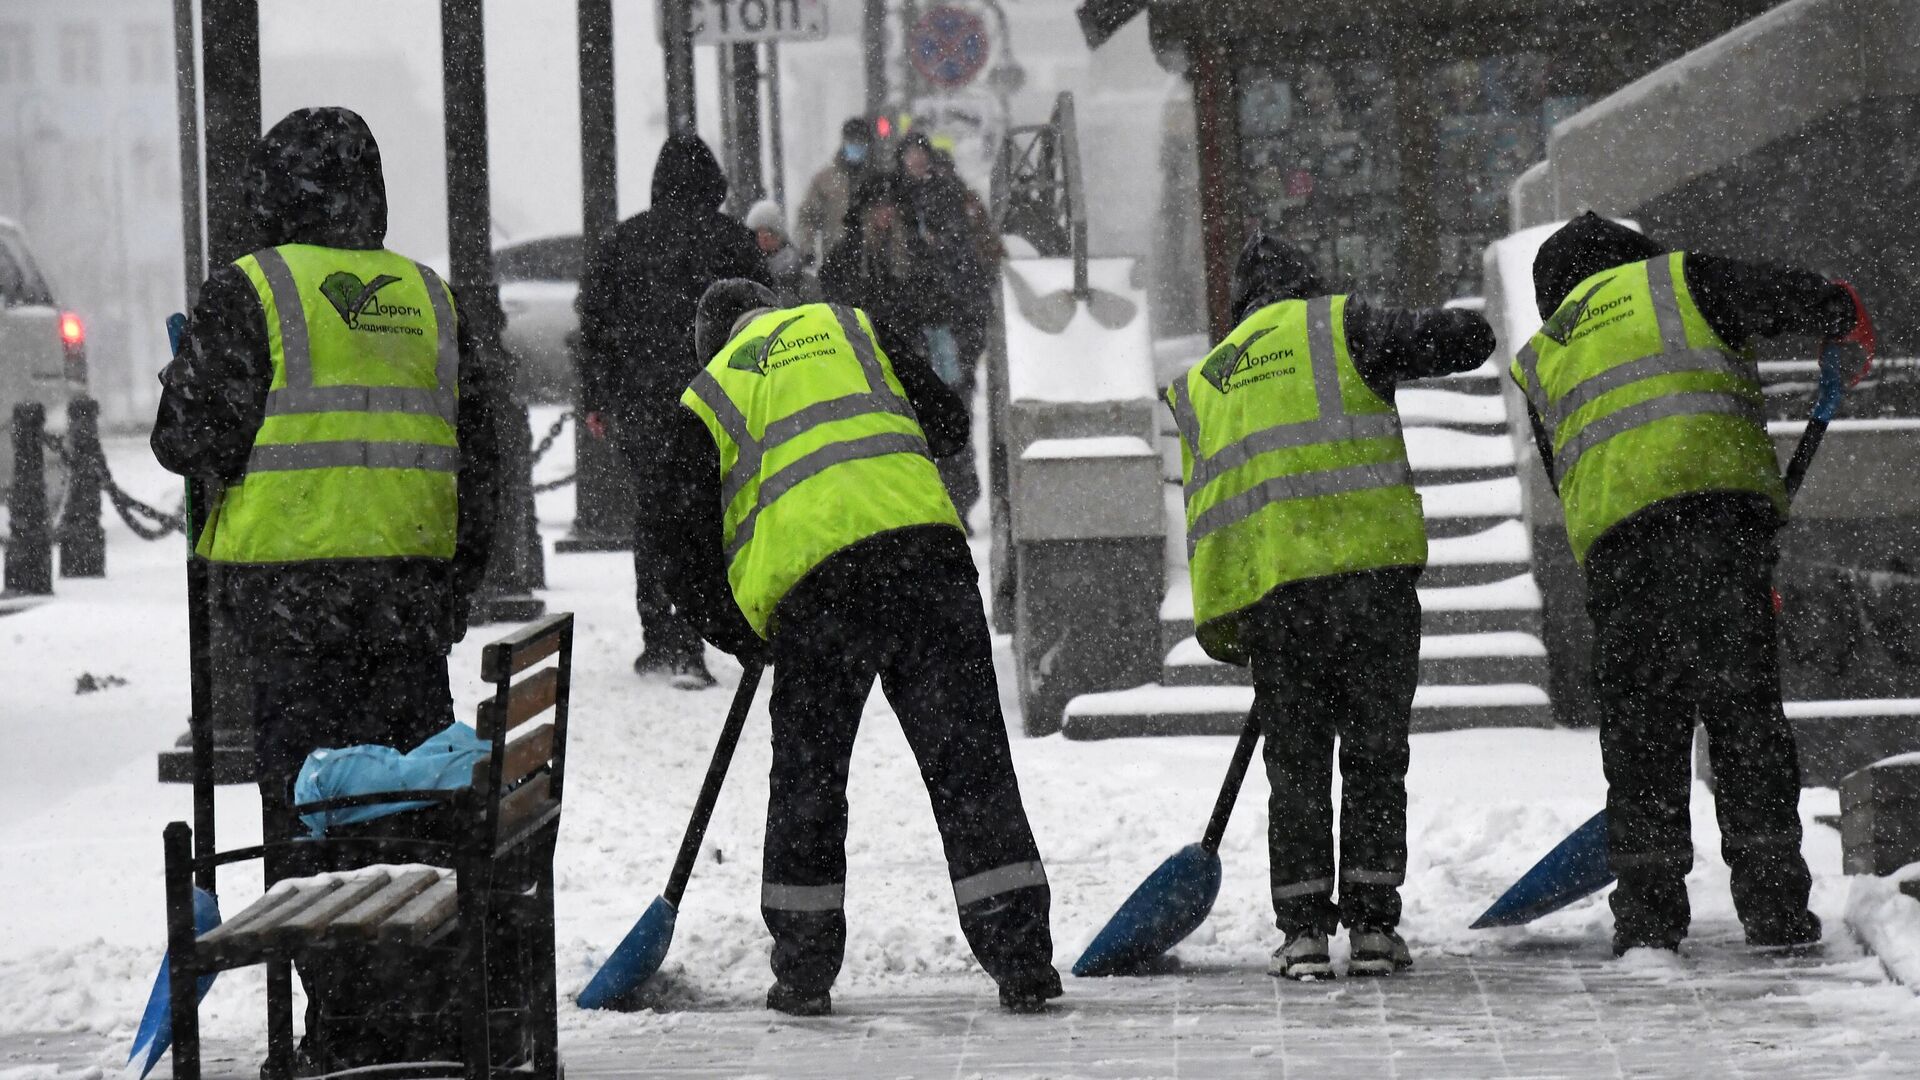 Utility workers remove snow on the streets of Vladivostok during heavy snowfall - 1920, 12/07/2021